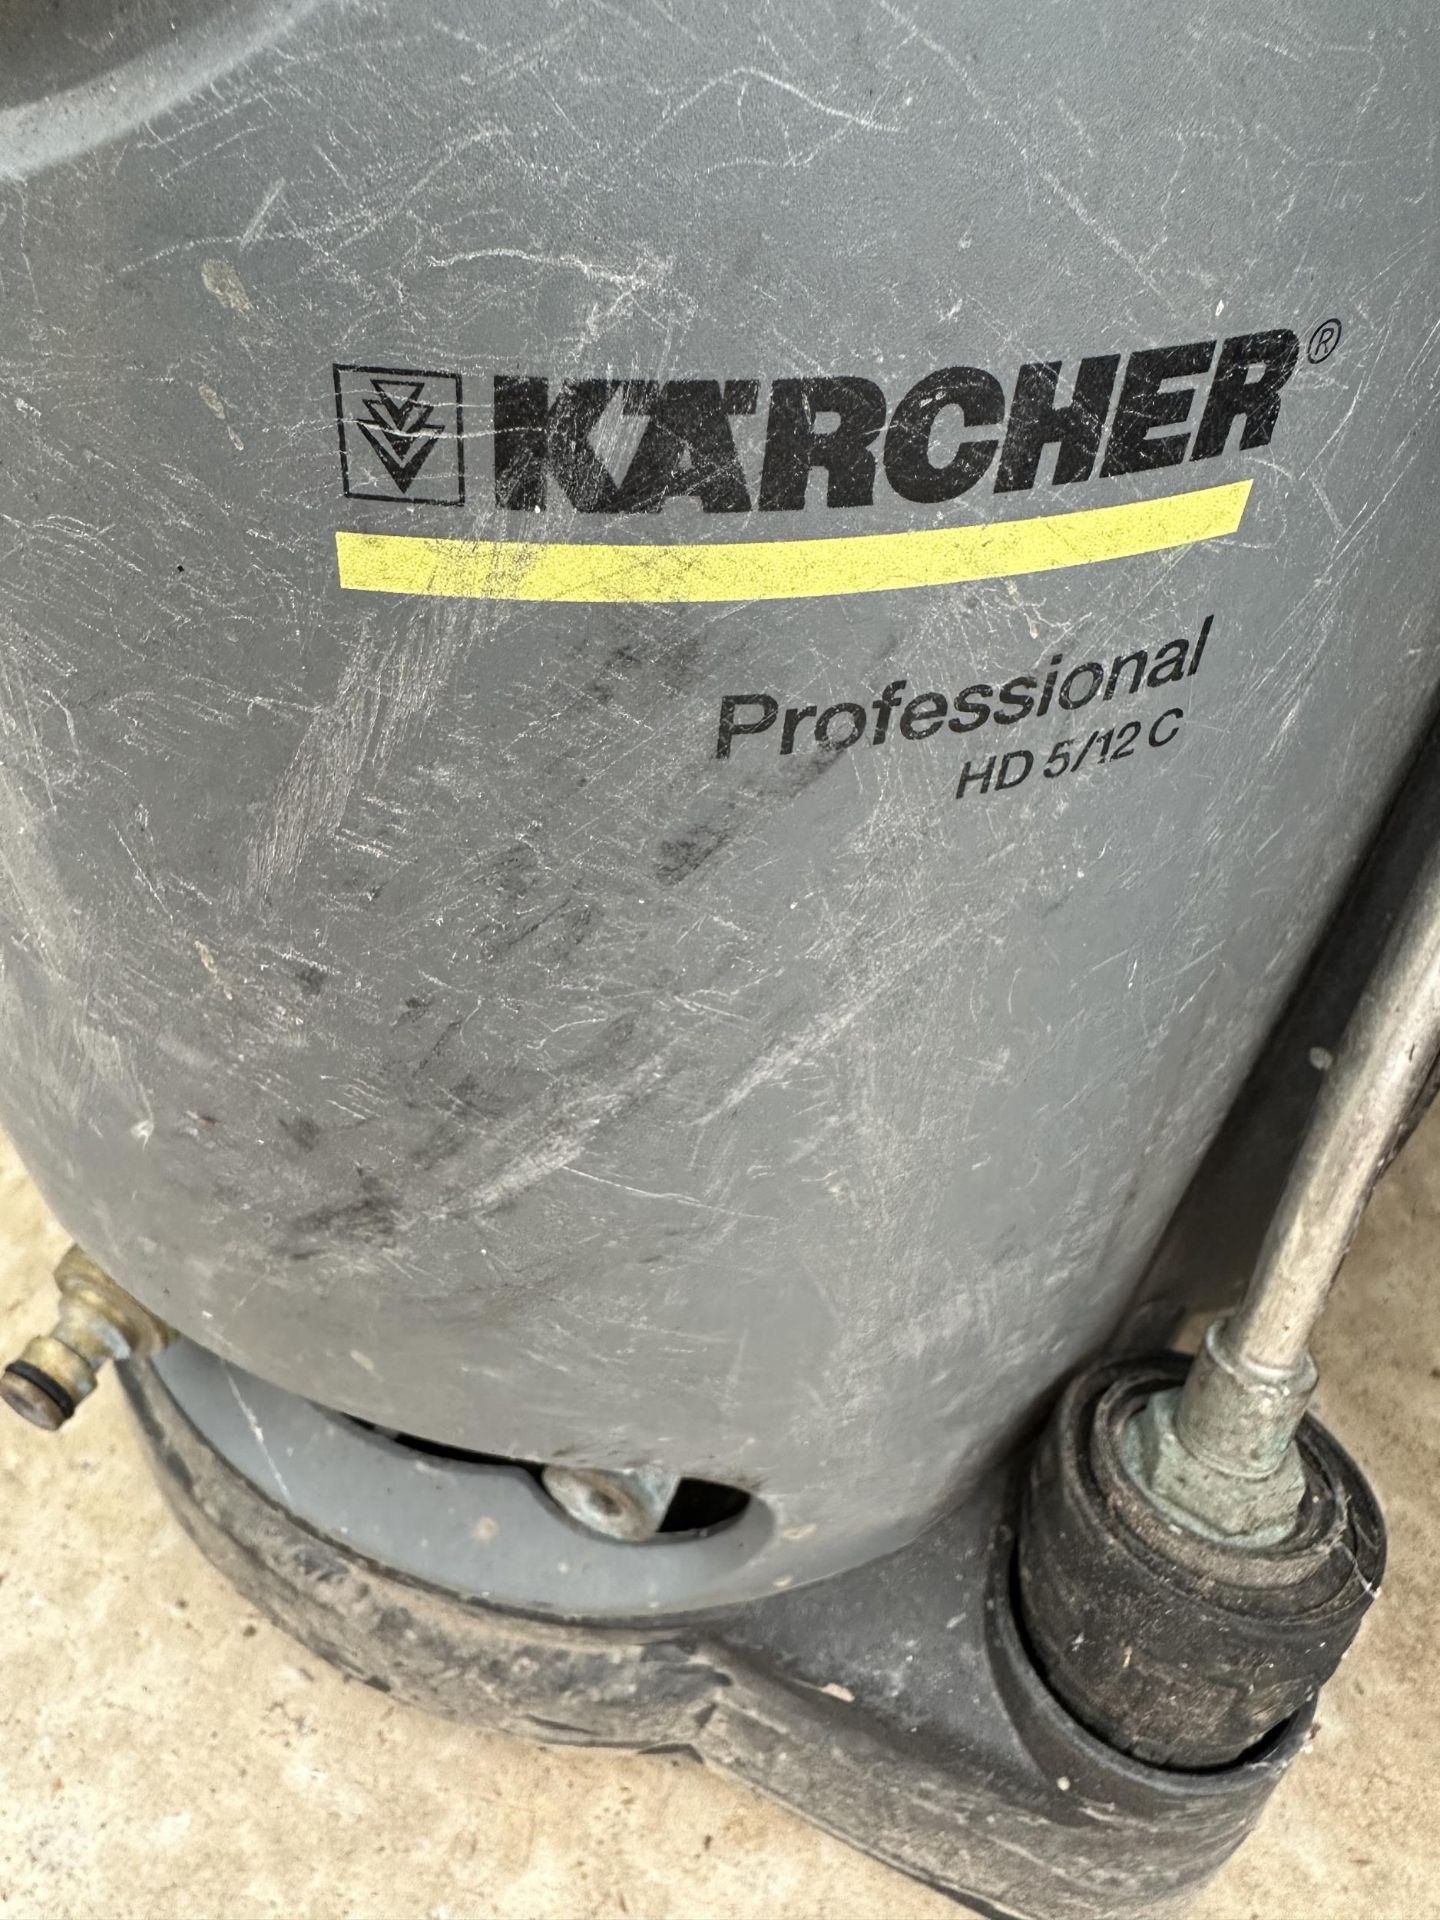 A KARCHER PROFESSIONAL HD5/12C PRESSURE WASHER - Image 2 of 2